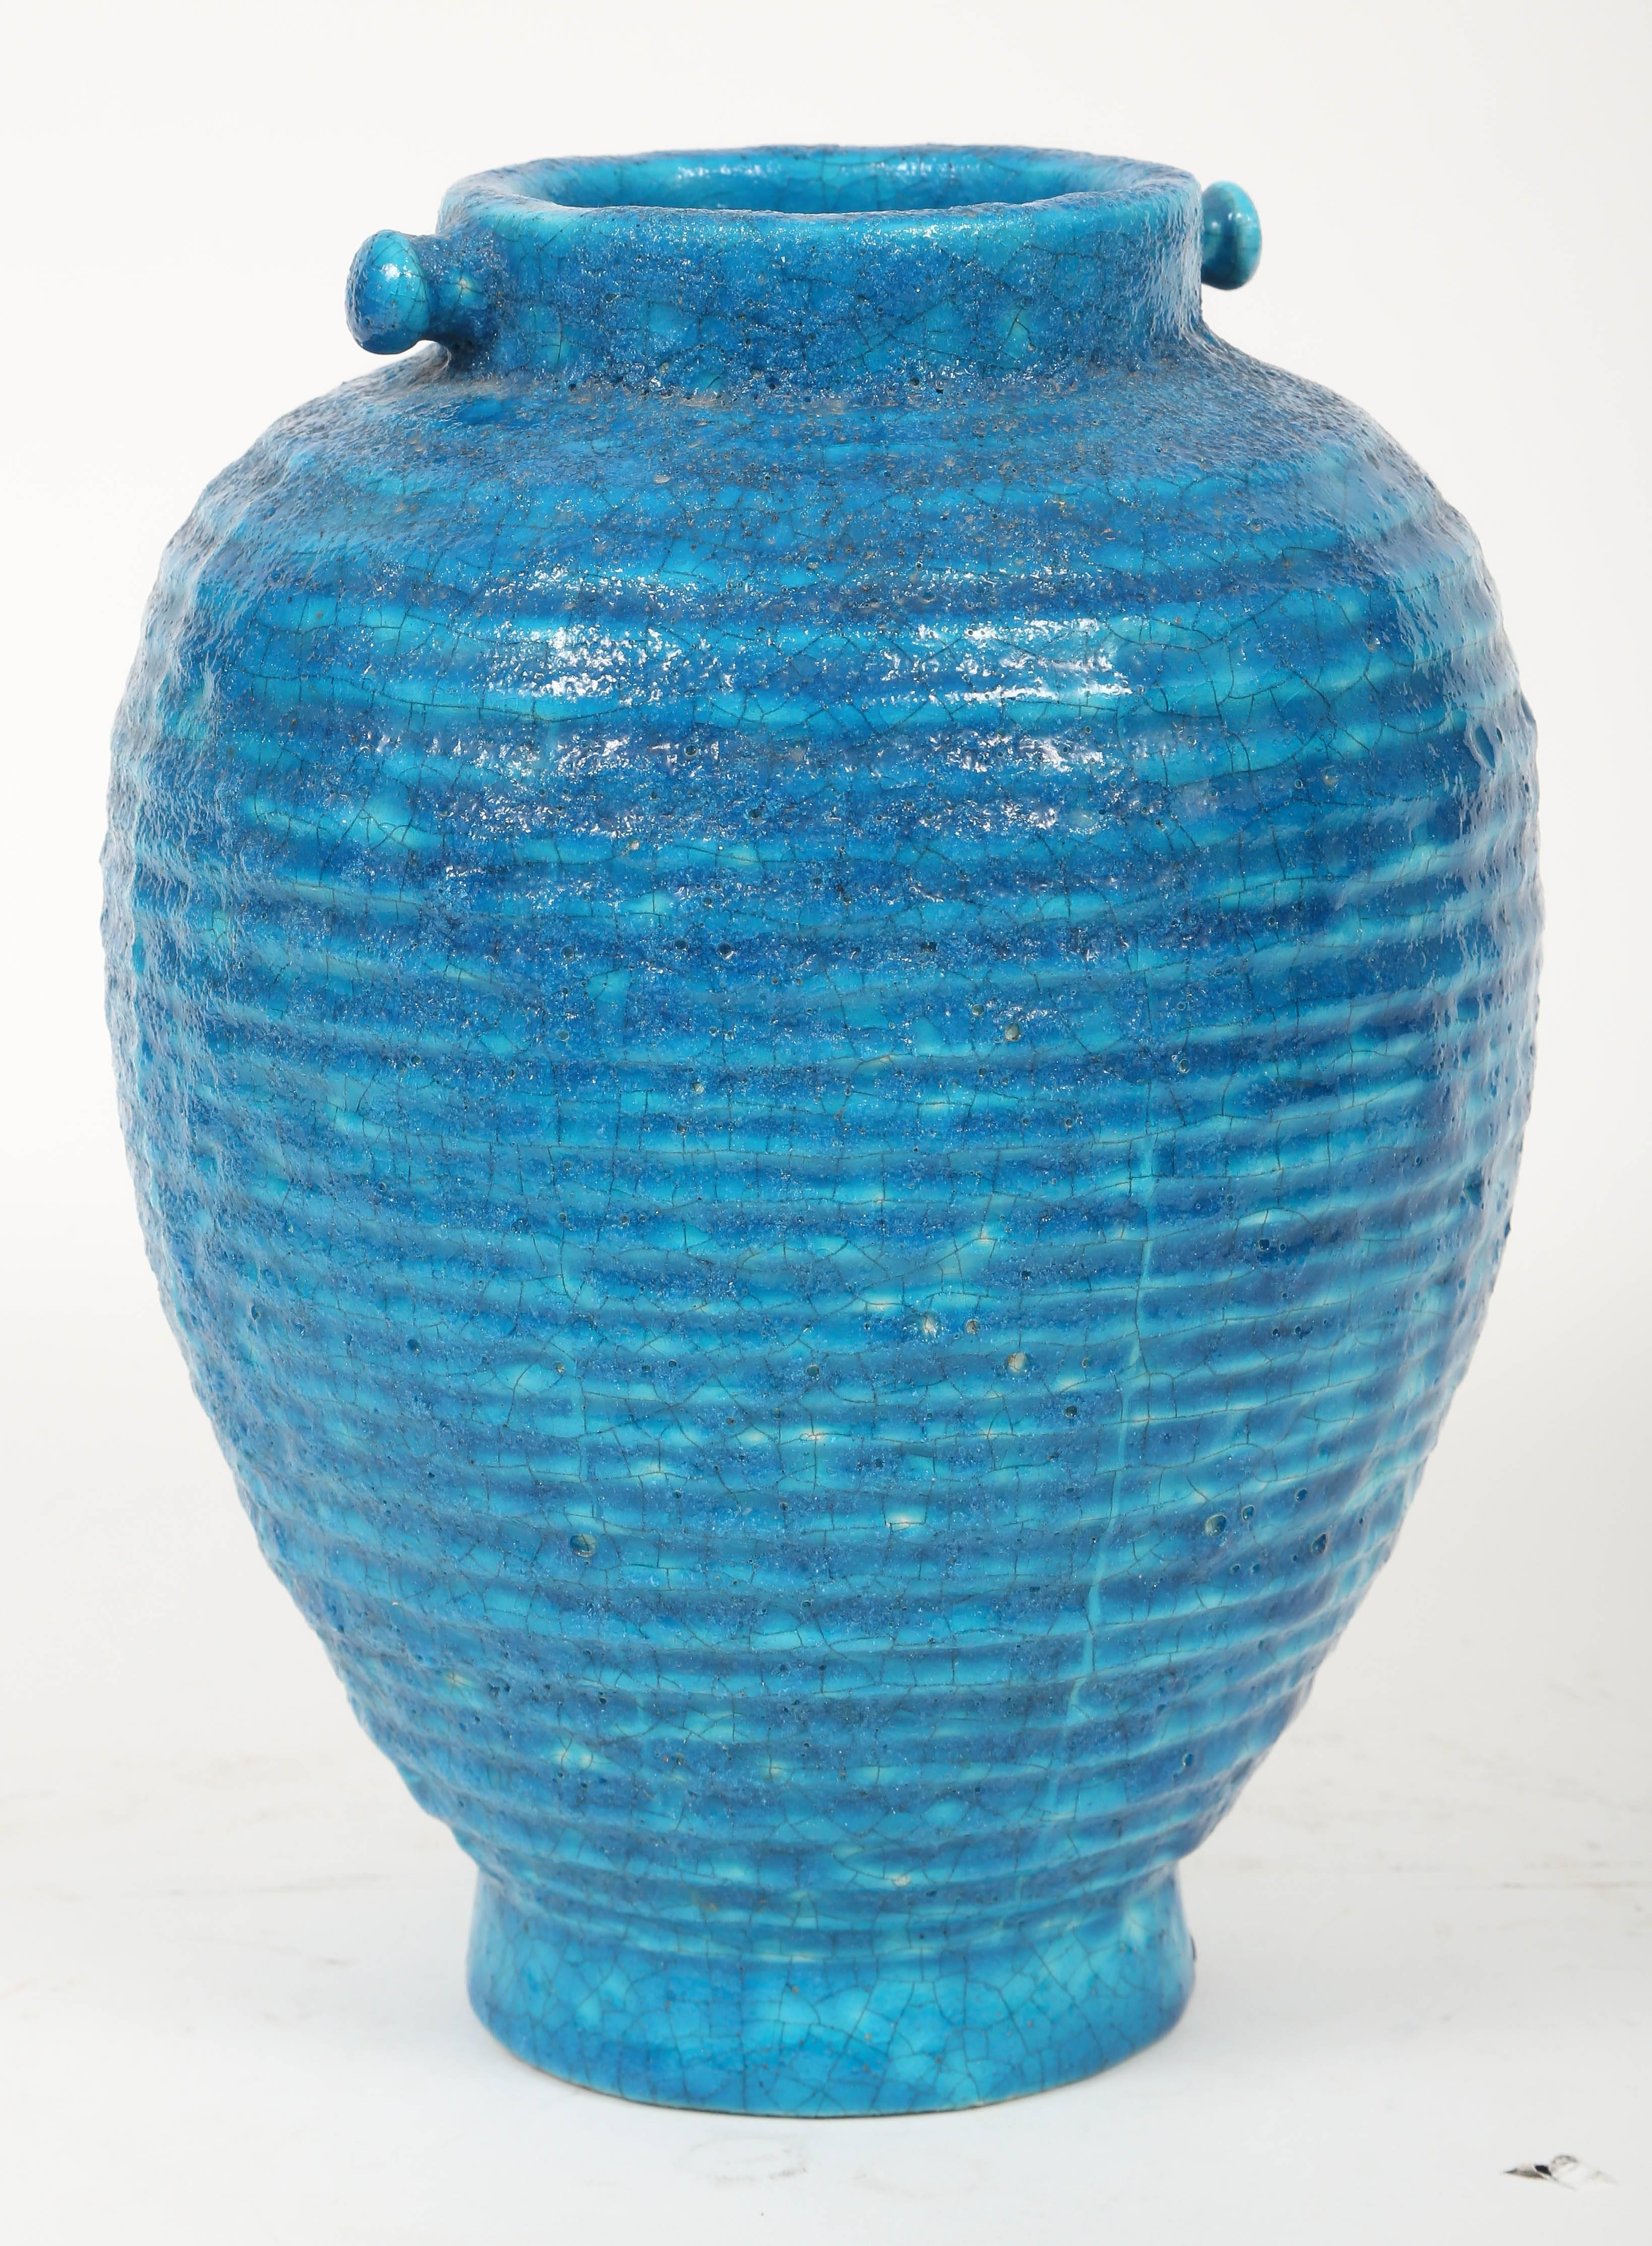 Unusual ribbed Lachenal vase with decorative posts on rim. Signed LACHENAL on bottom, partially obscured by final glazing.